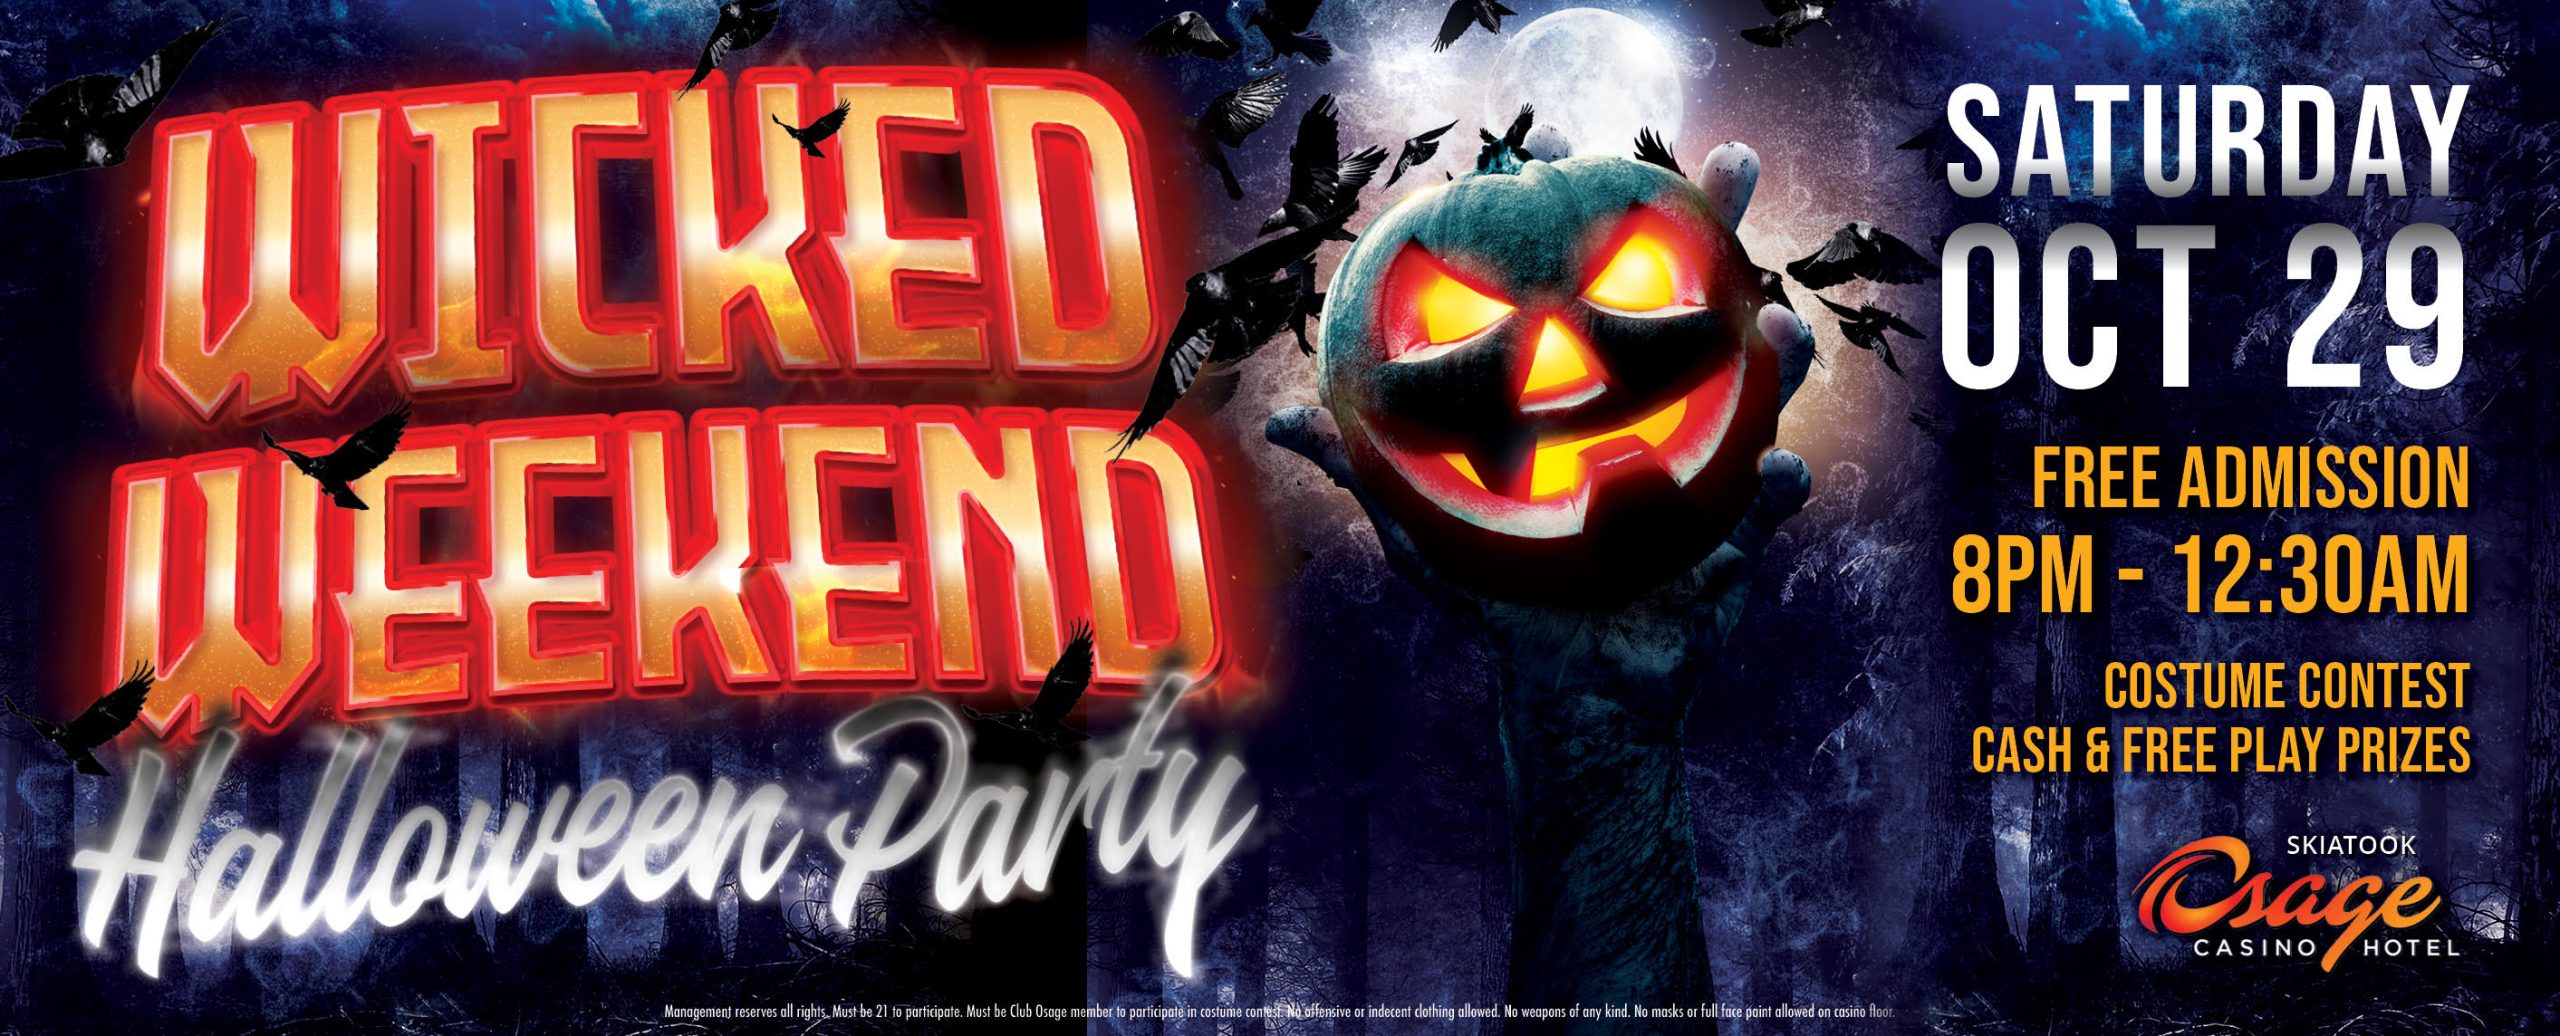 Wicked Weekend Halloween Party - Oct 29th